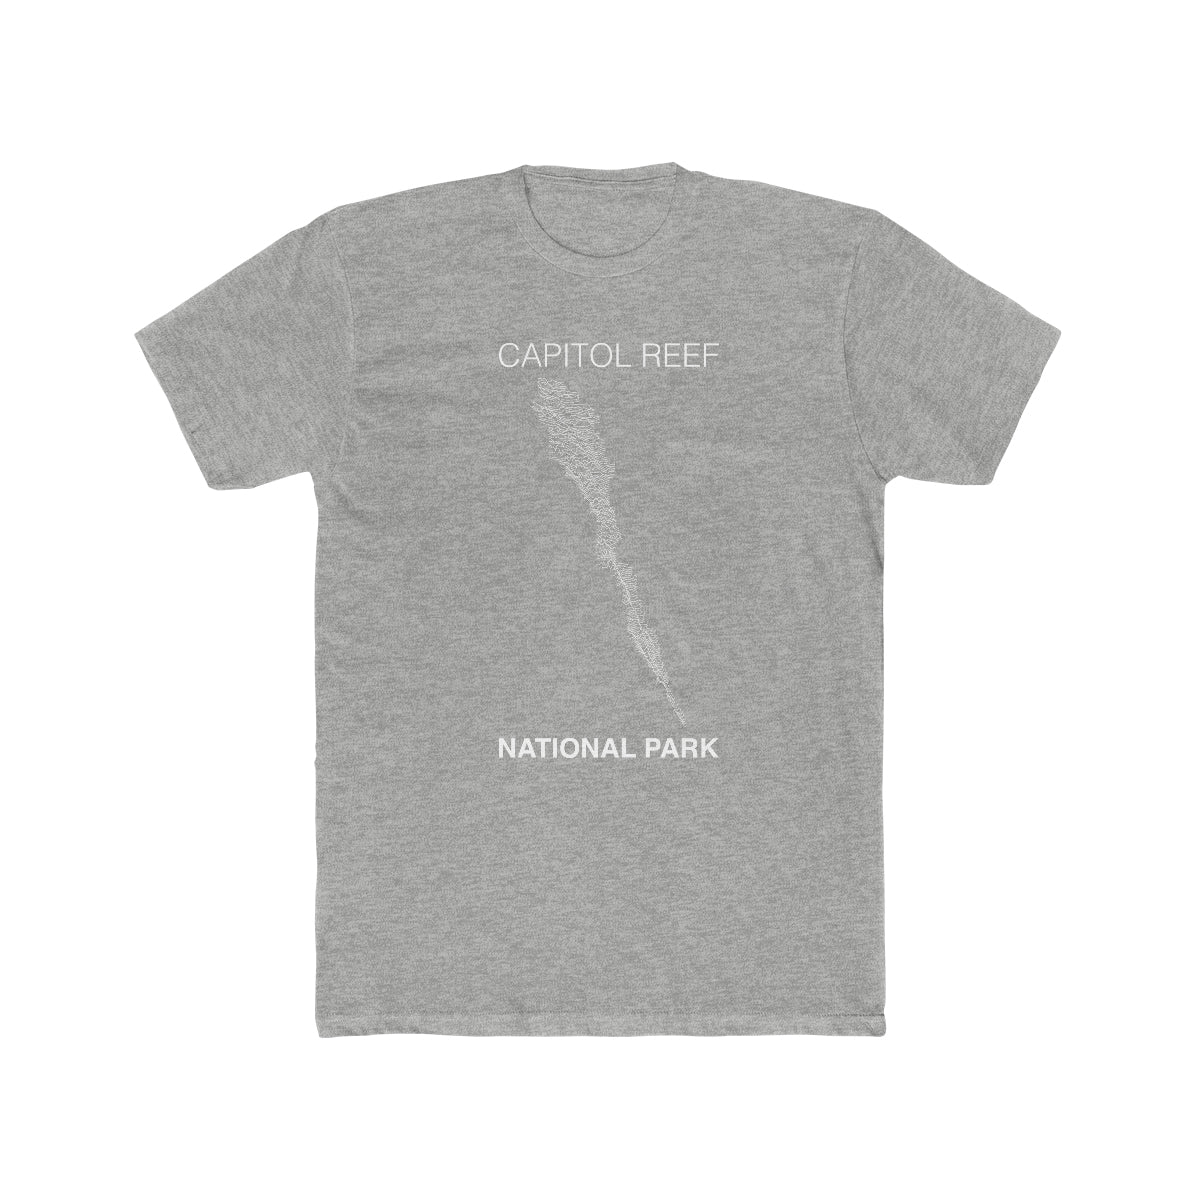 Capitol Reef National Park T-Shirt Lines